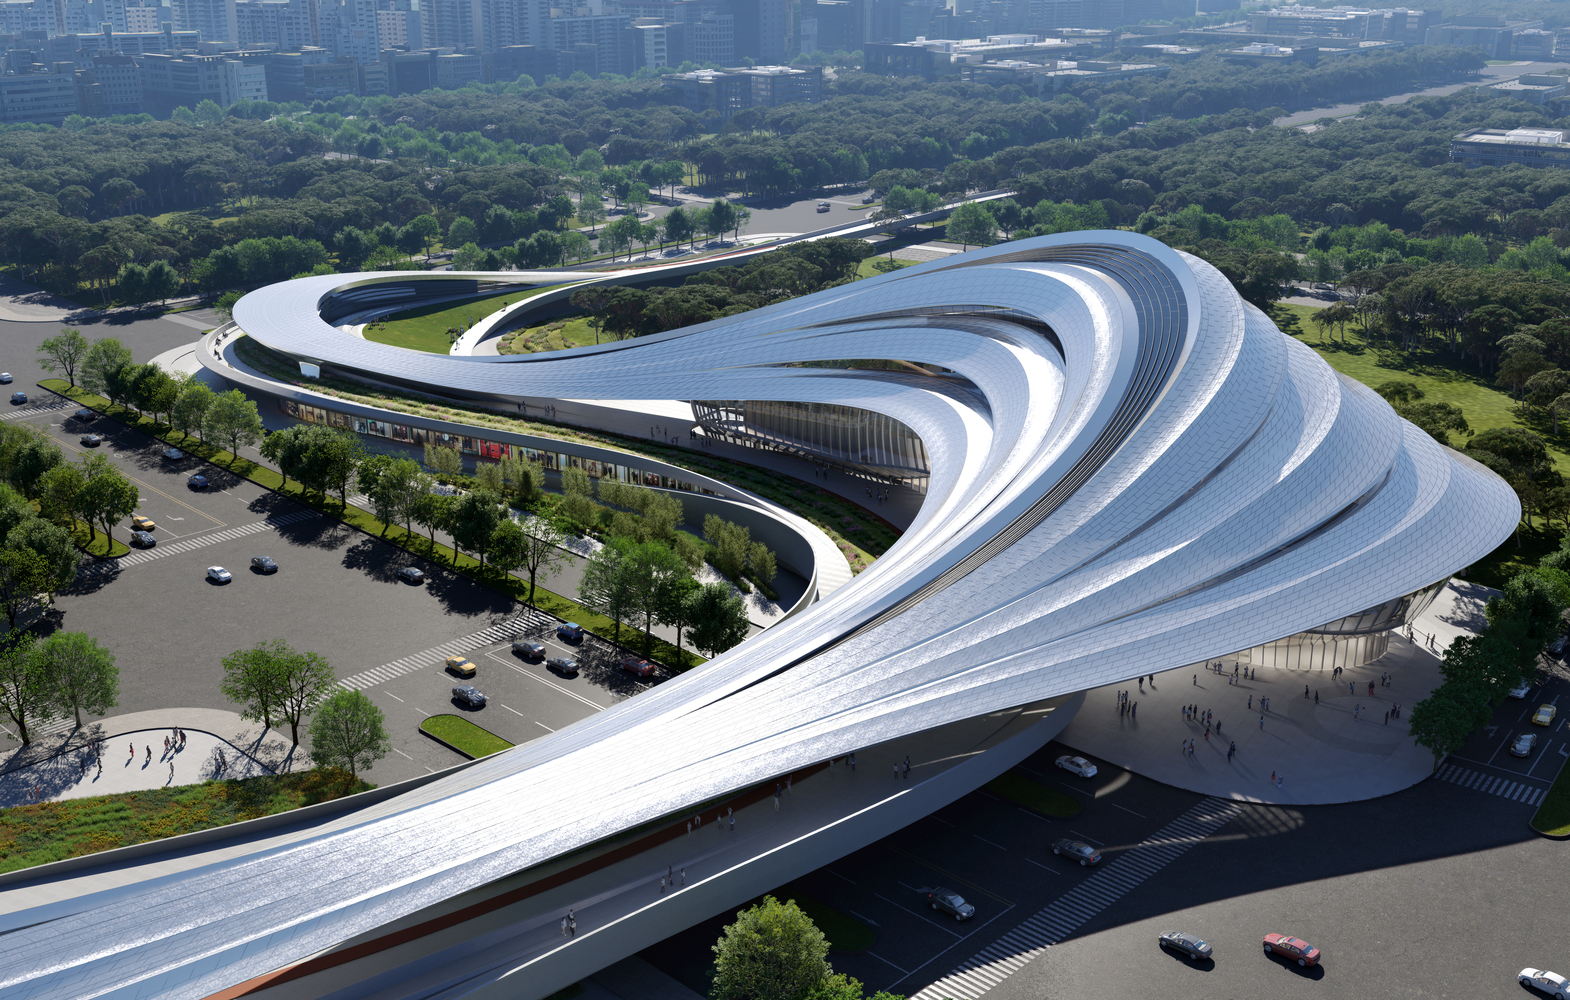 Jinghe New City Culture and Art Center by Zaha Hadid Architect